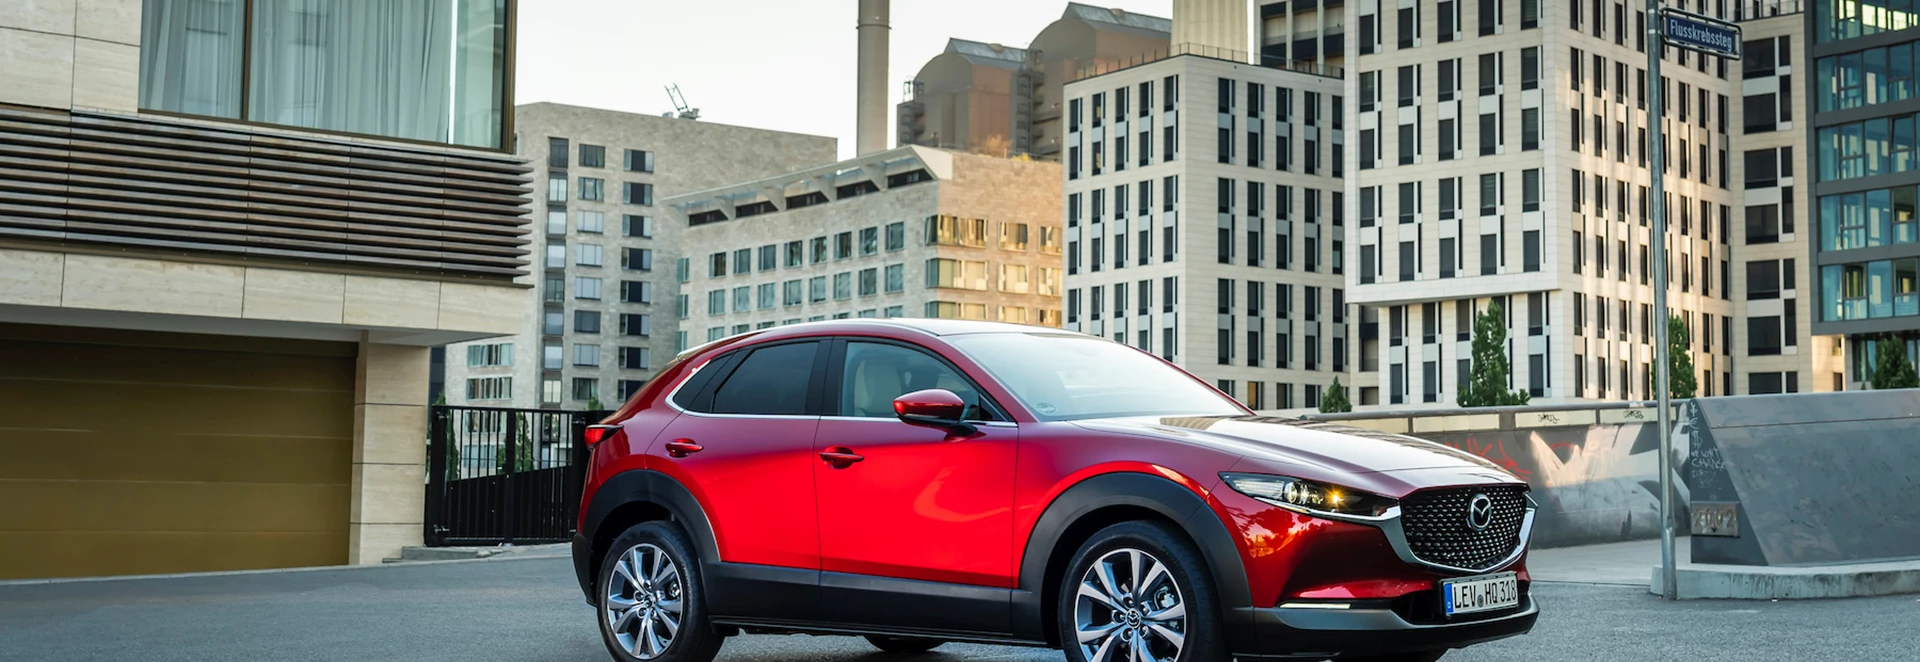 Buyer’s guide to the Mazda CX-30